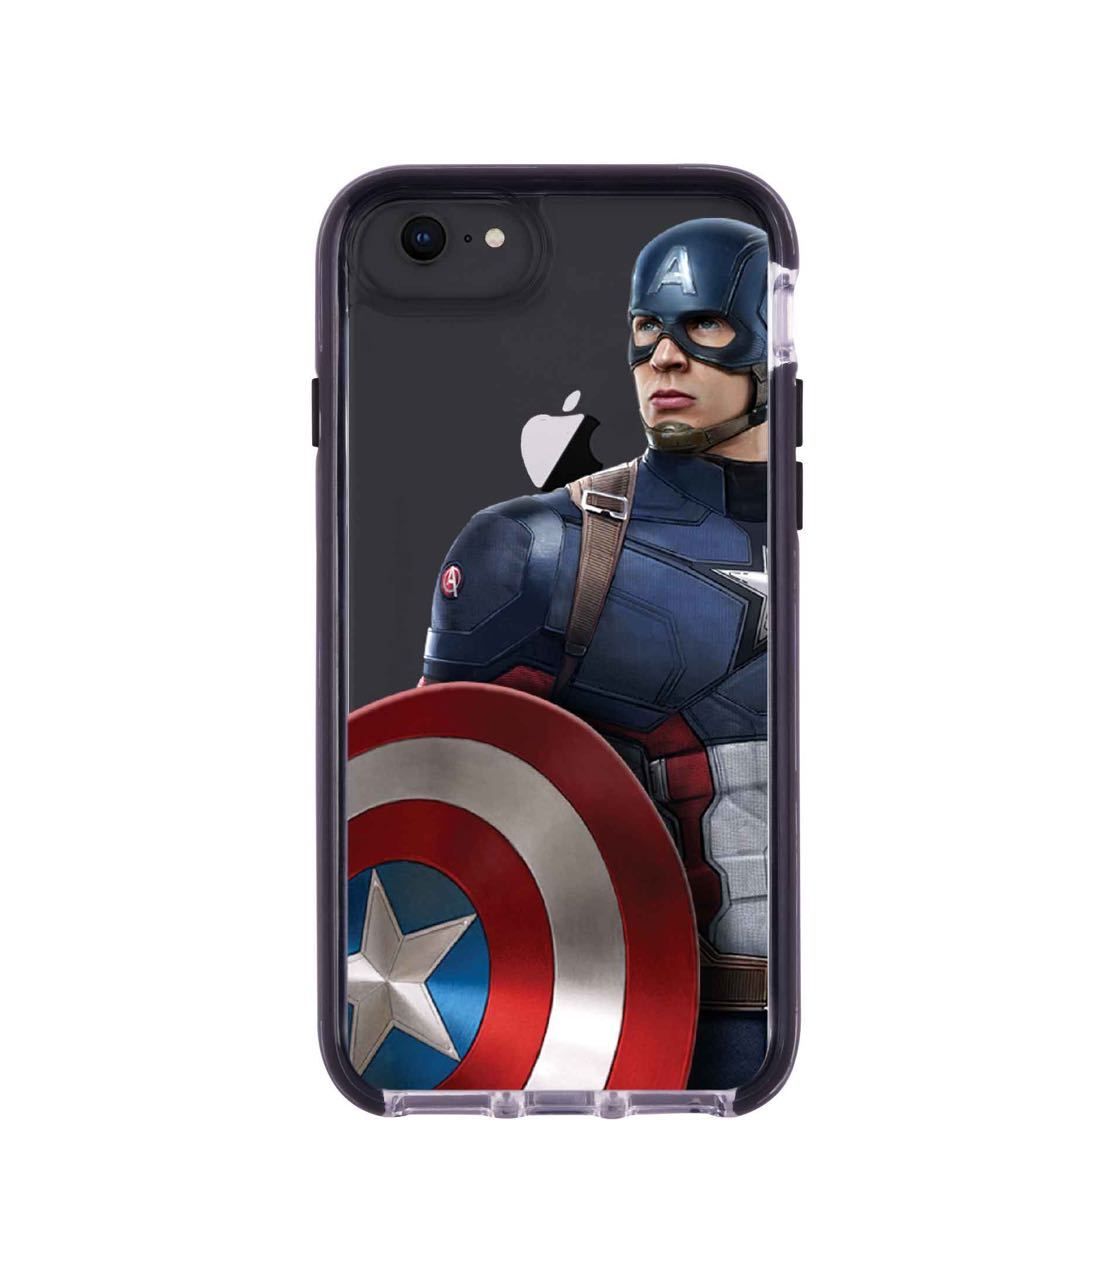 Team Blue Captain - Extreme Phone Case for iPhone 8